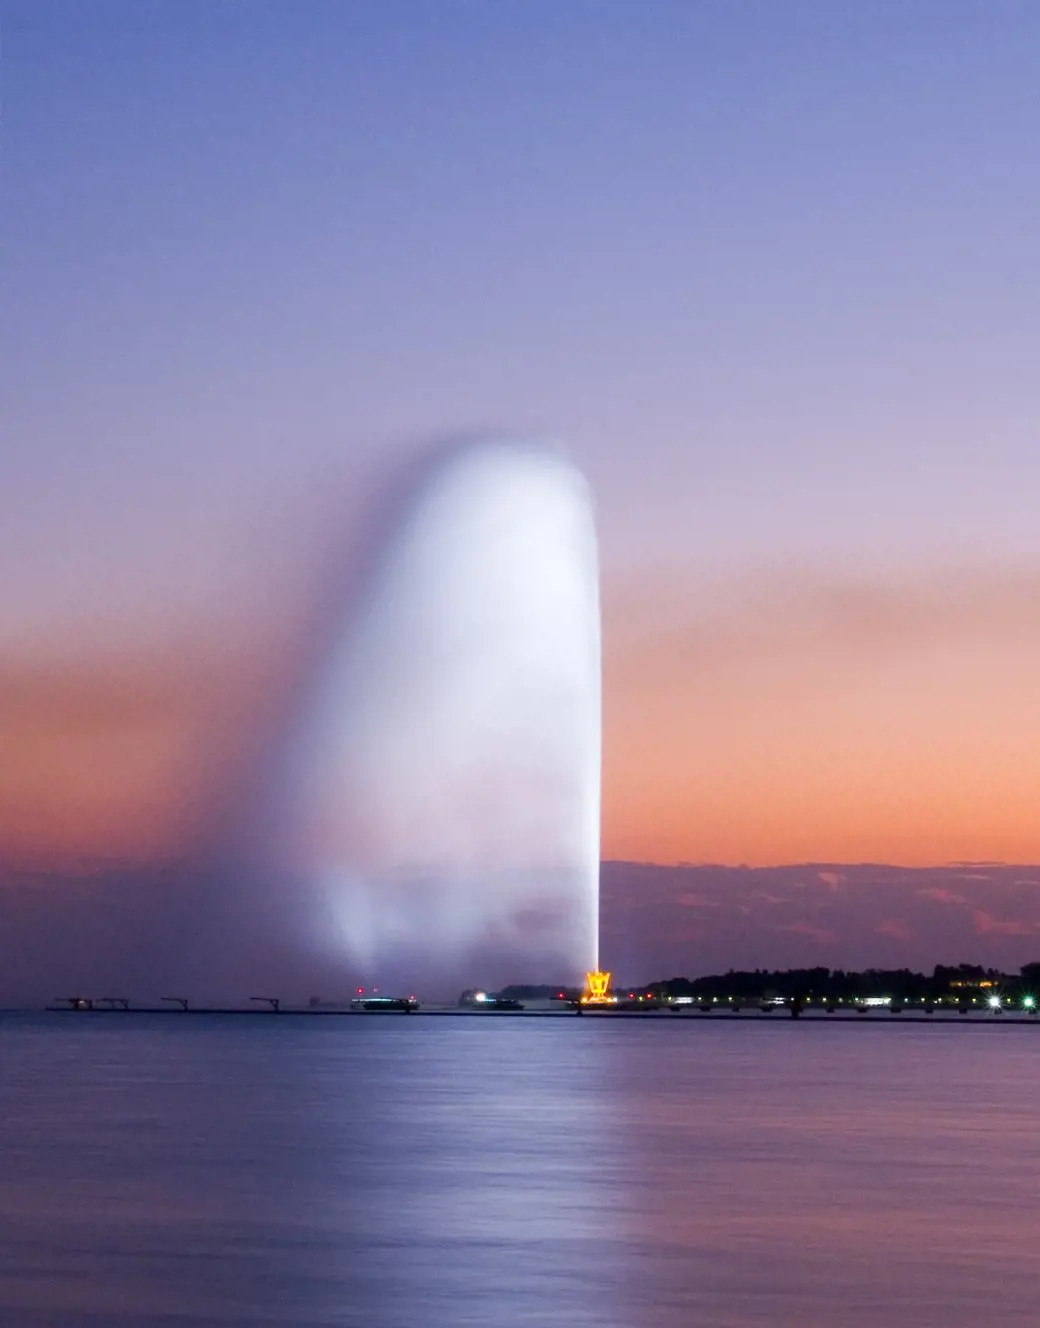 Jeddah's King Fahd's Fountain resembles the iconic fountain in Lake Geneva and is the tallest fountain of its type in the world